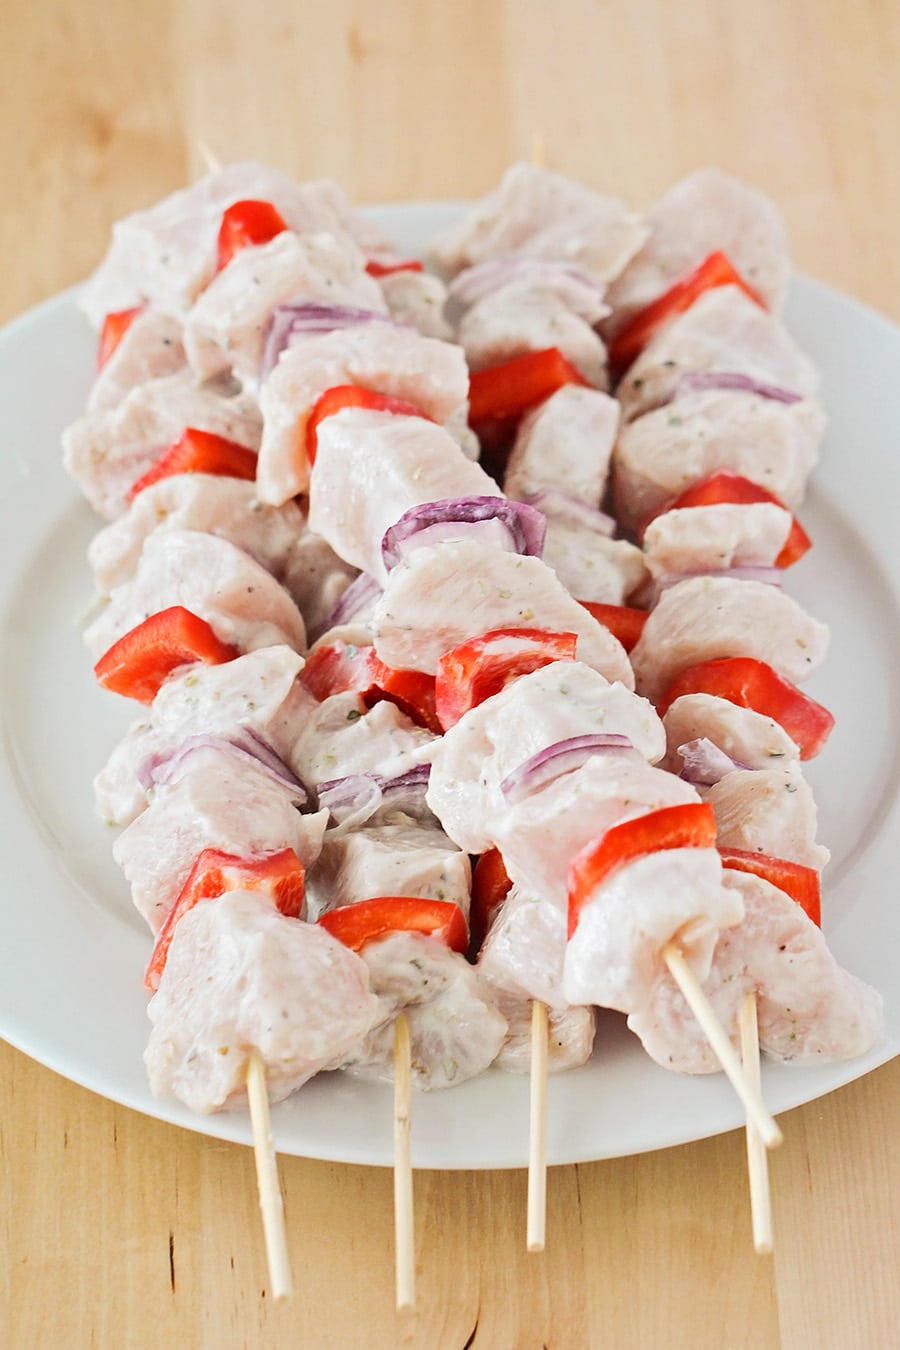 Greek chicken souvlaki skewers marinating before going in the oven